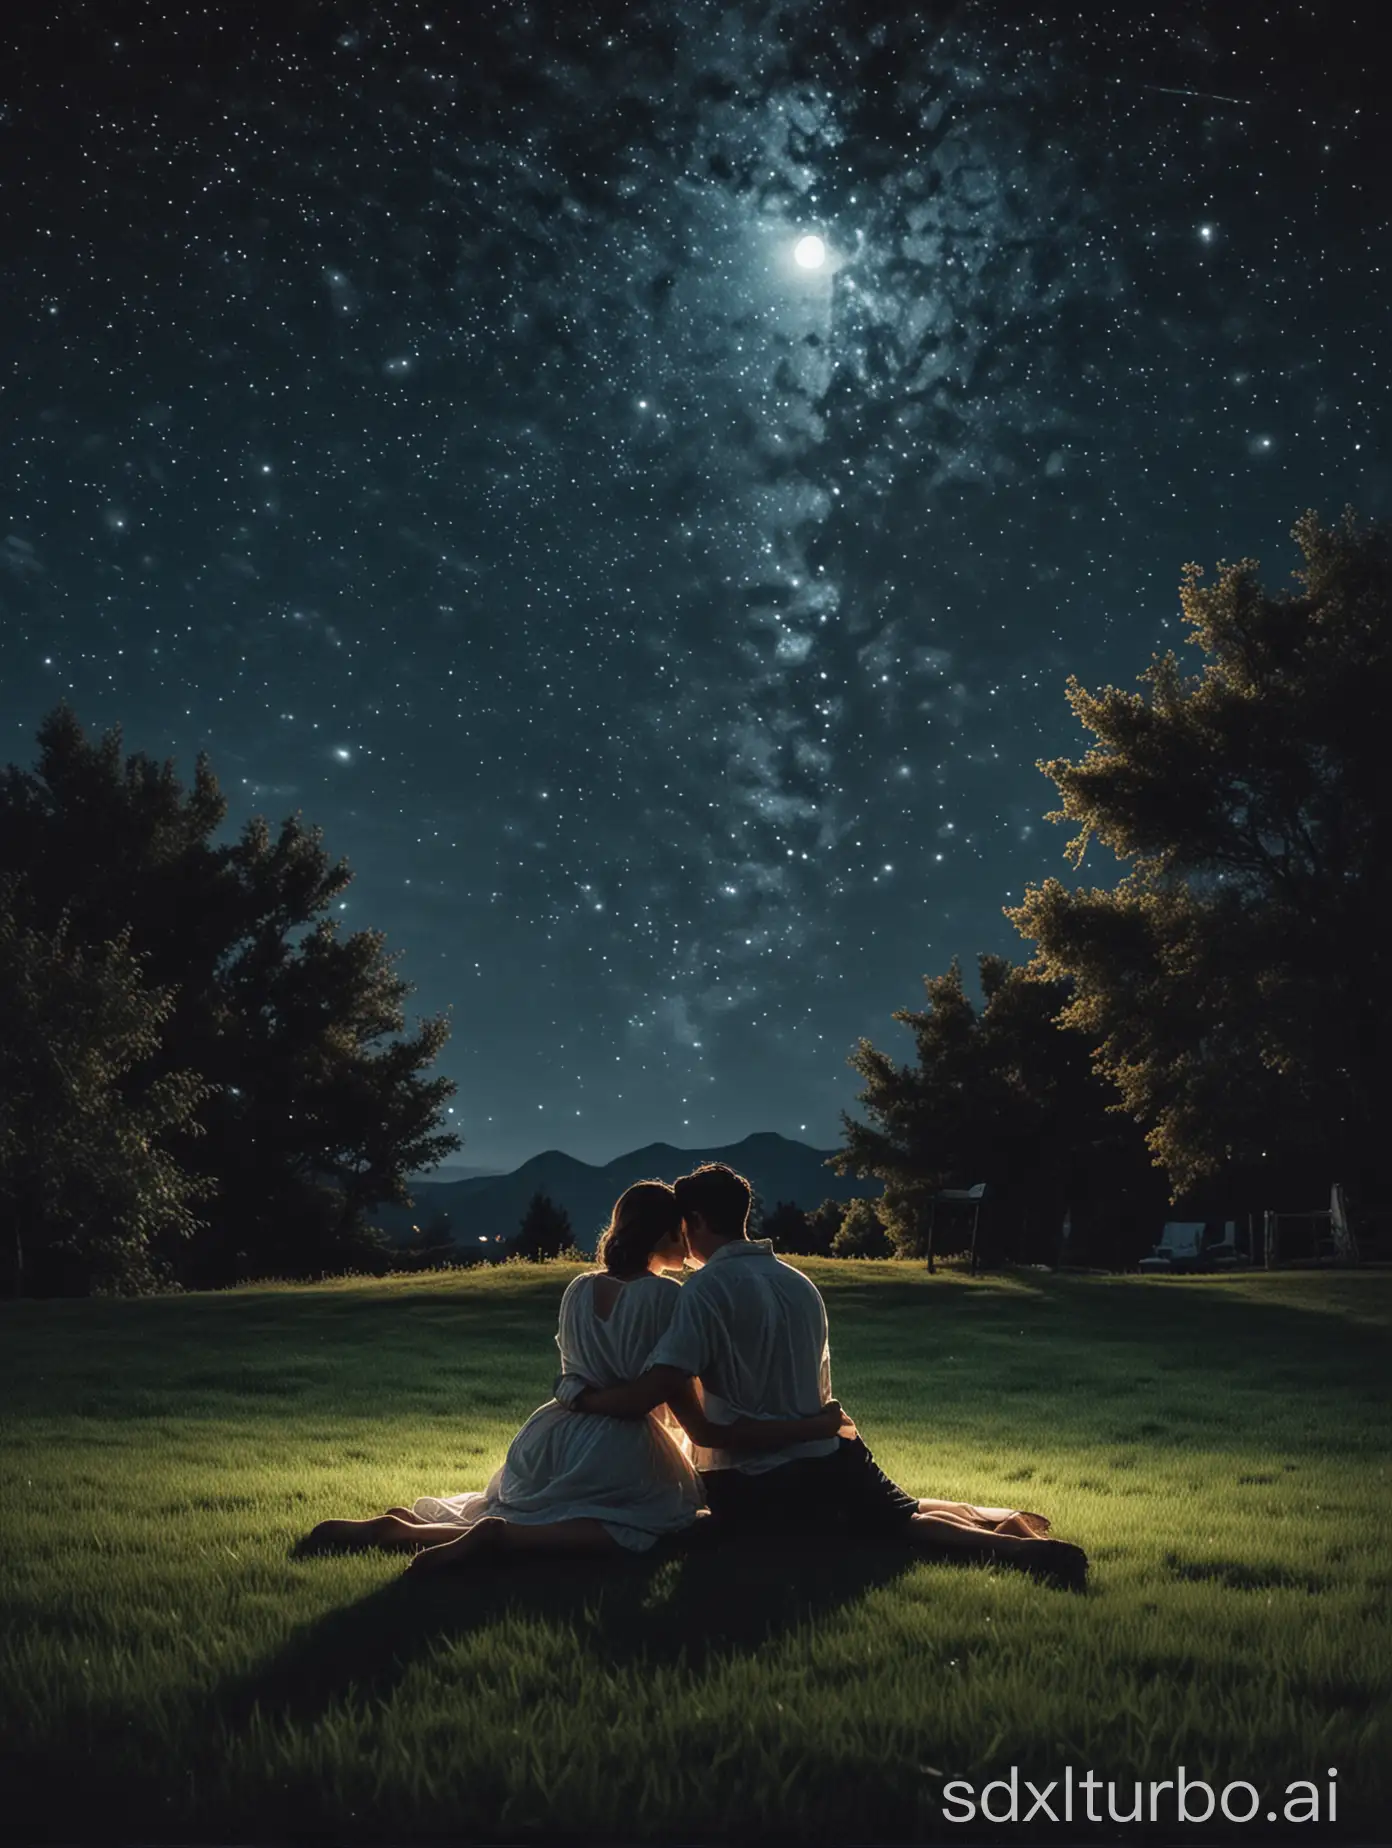 Under the bright starry sky and bright moonlight, a couple sits on the lawn and cuddles up intimately